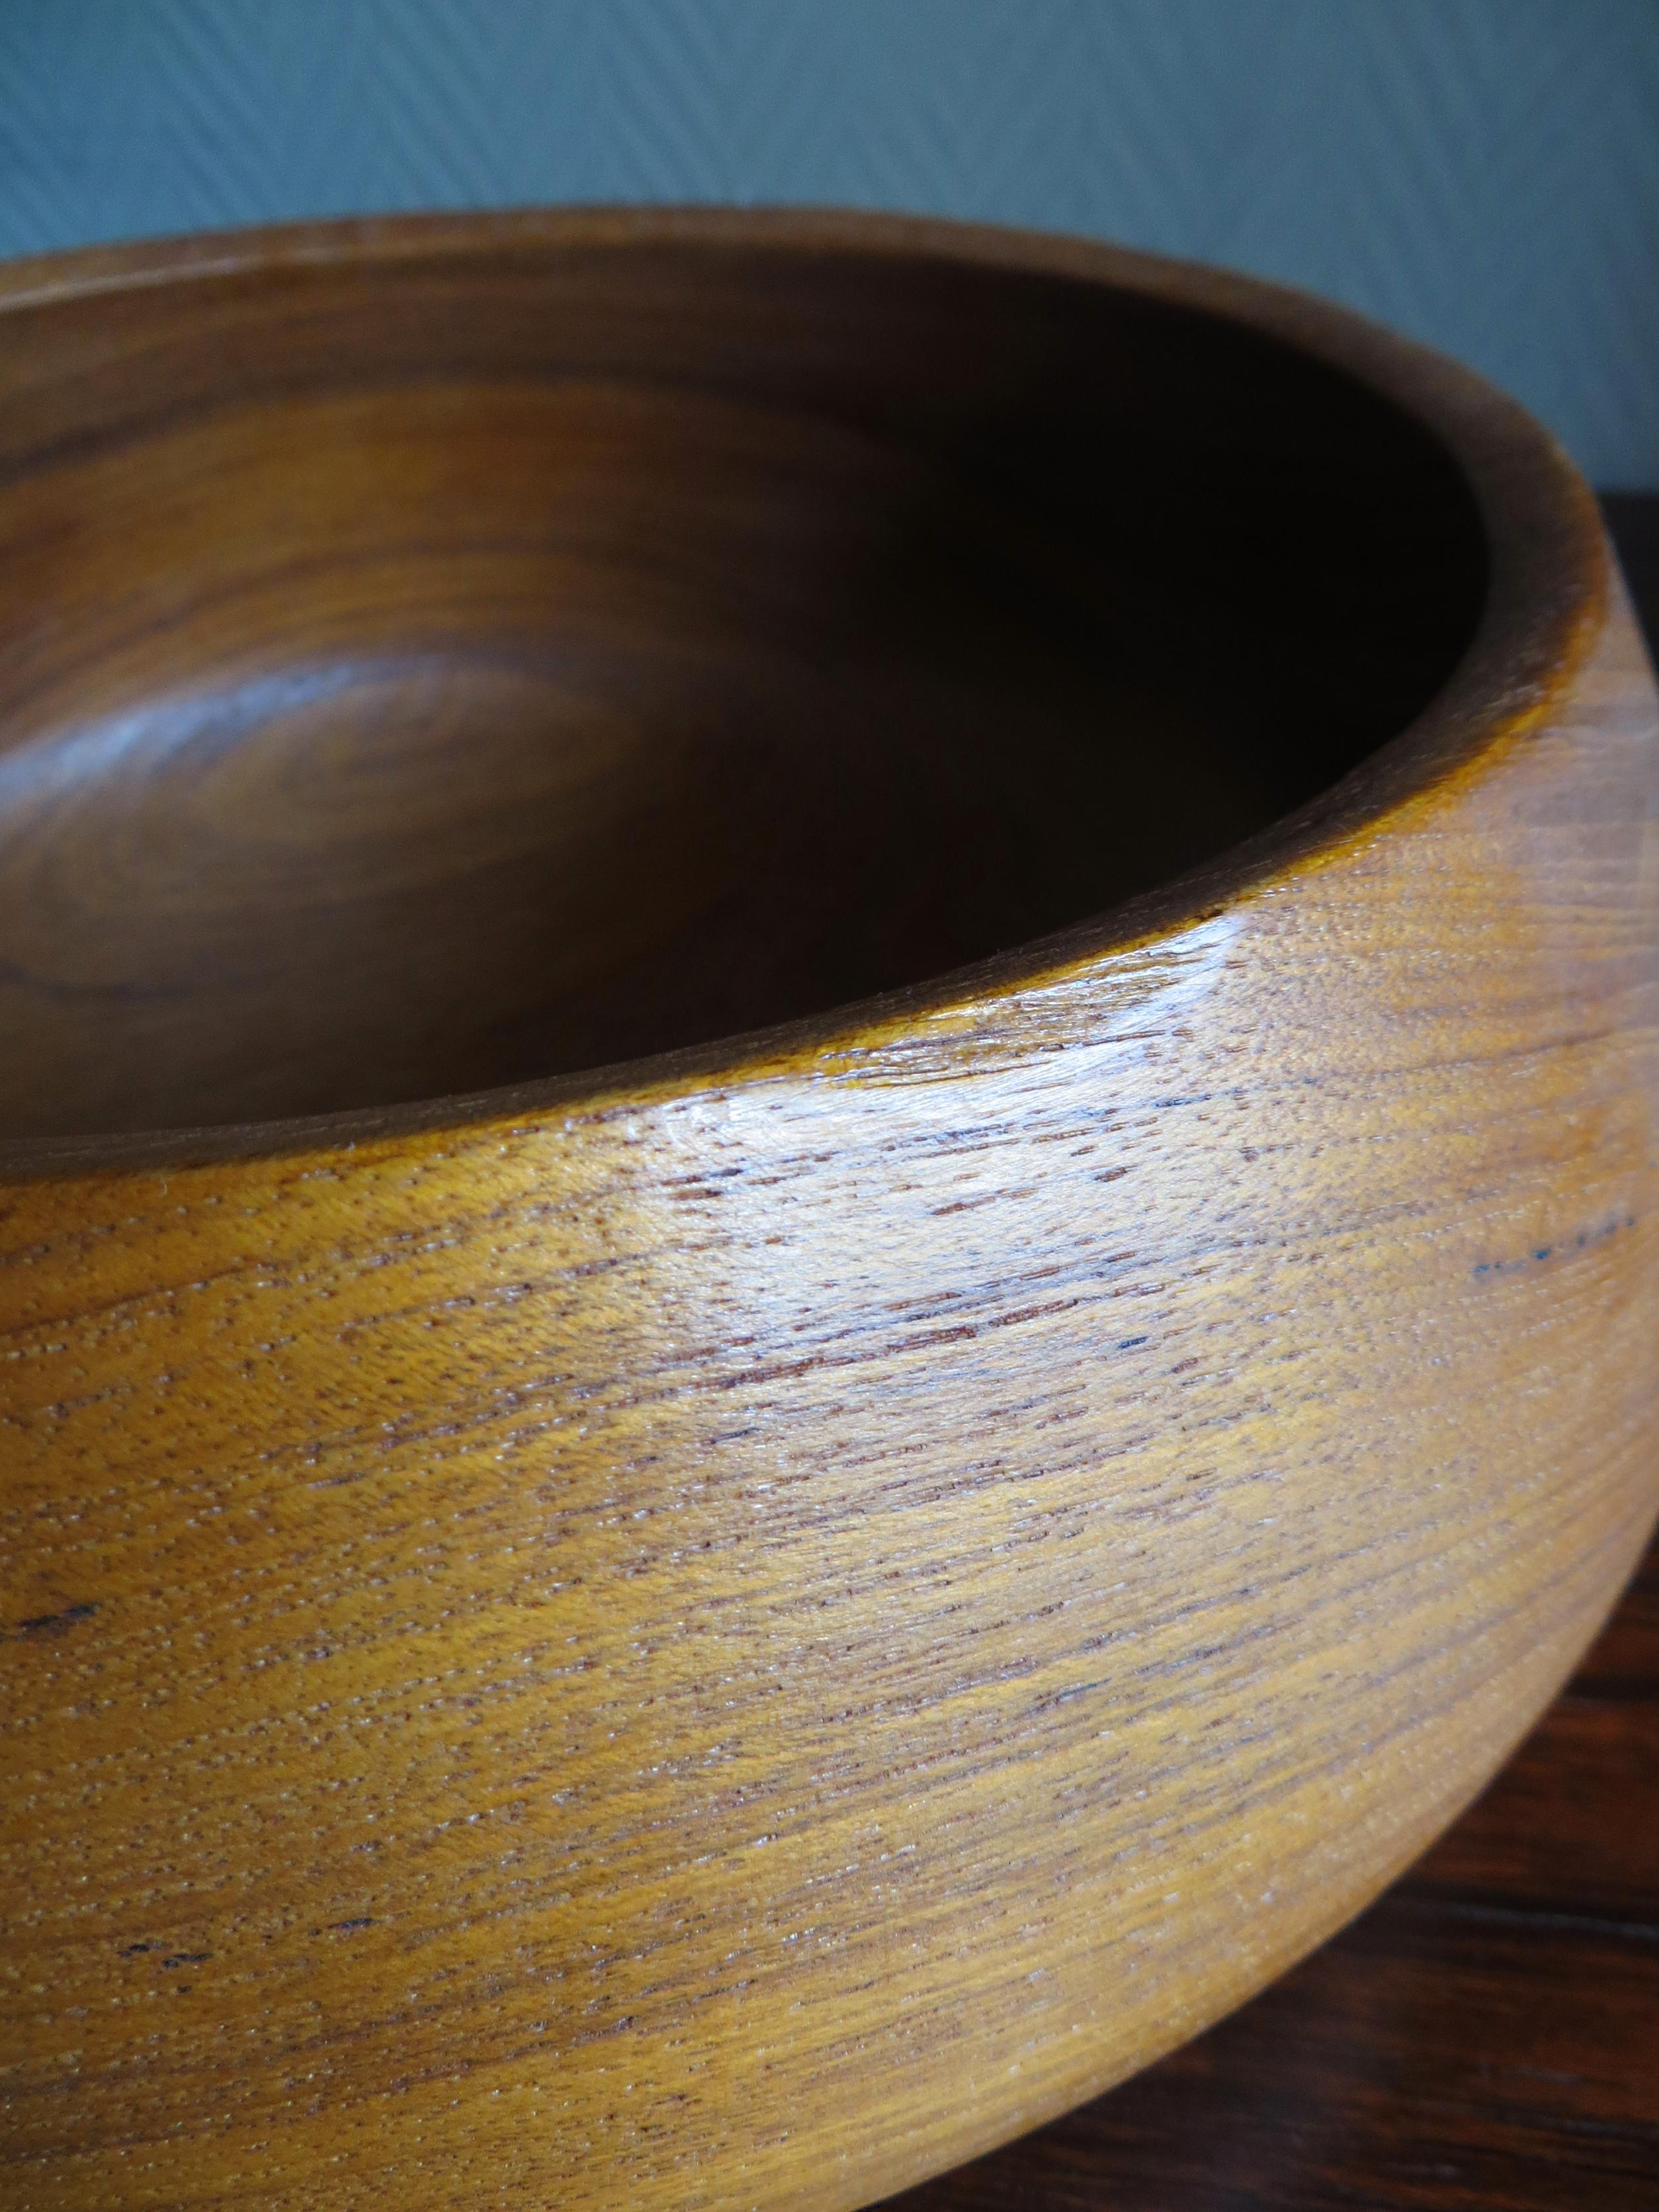 Large Danish Midcentury Hand Moulded & Organic Rounded Shaped Teak Bowl , 1950s For Sale 4